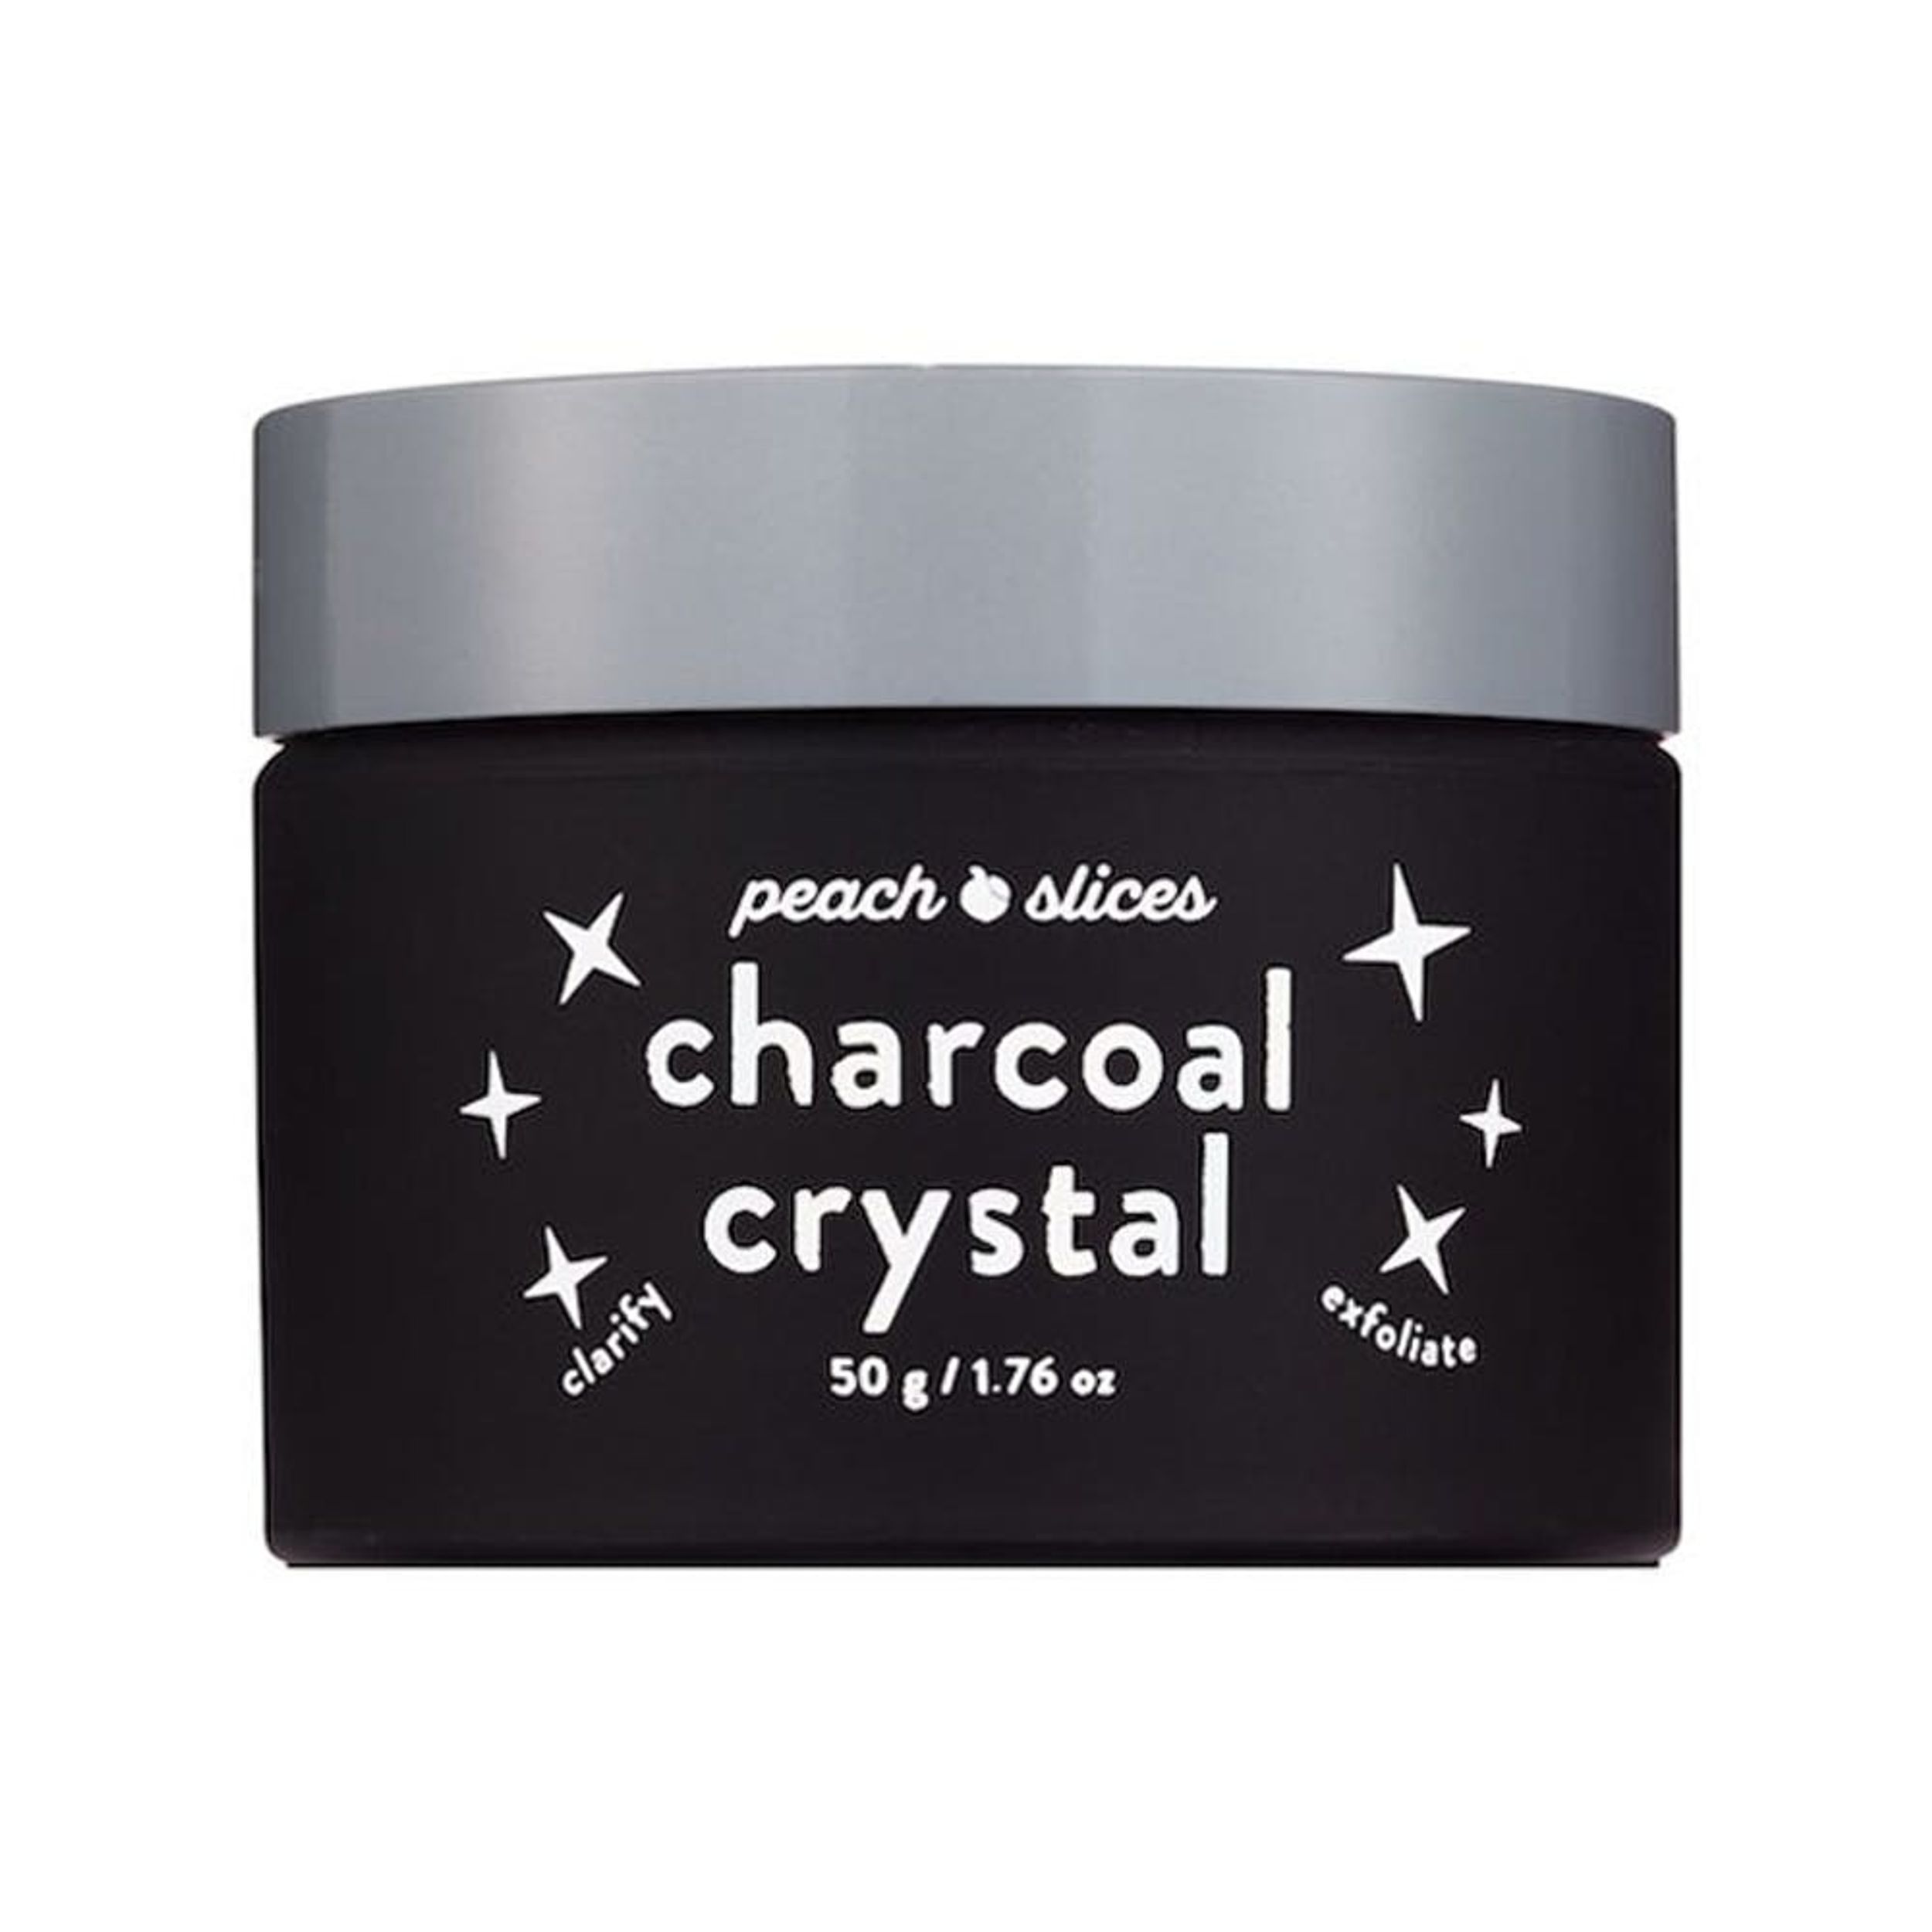 13 Charcoal Beauty Products That Deliver Healthier Skin, Teeth, and Hair